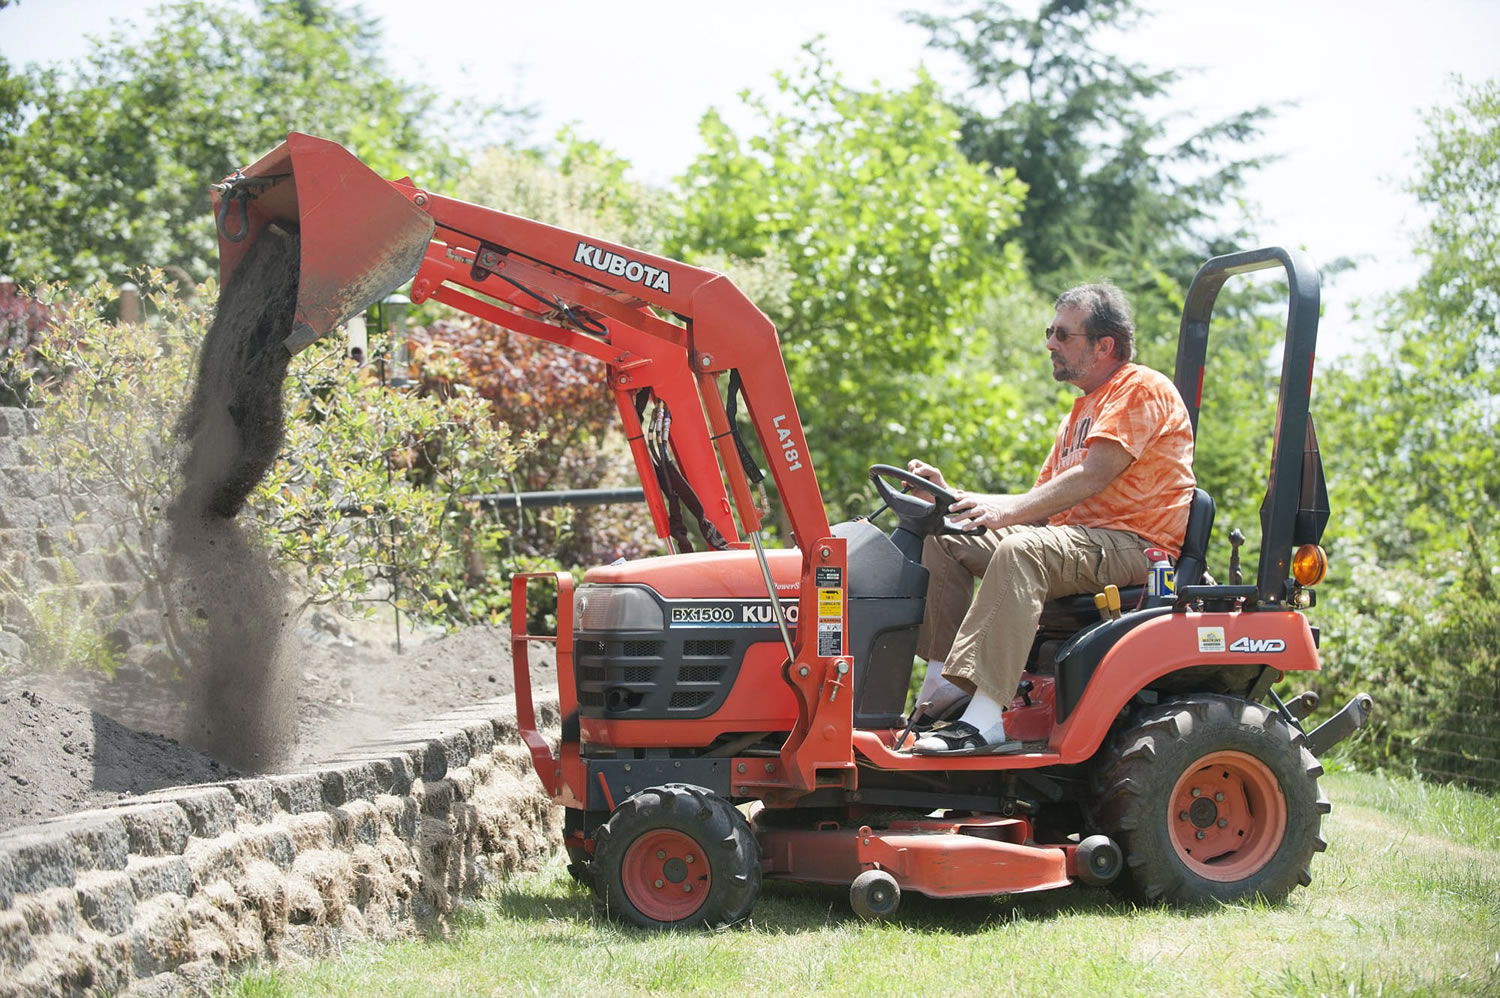 Rick Dobson uses a tractor to work in his yard at his home in Kalama.